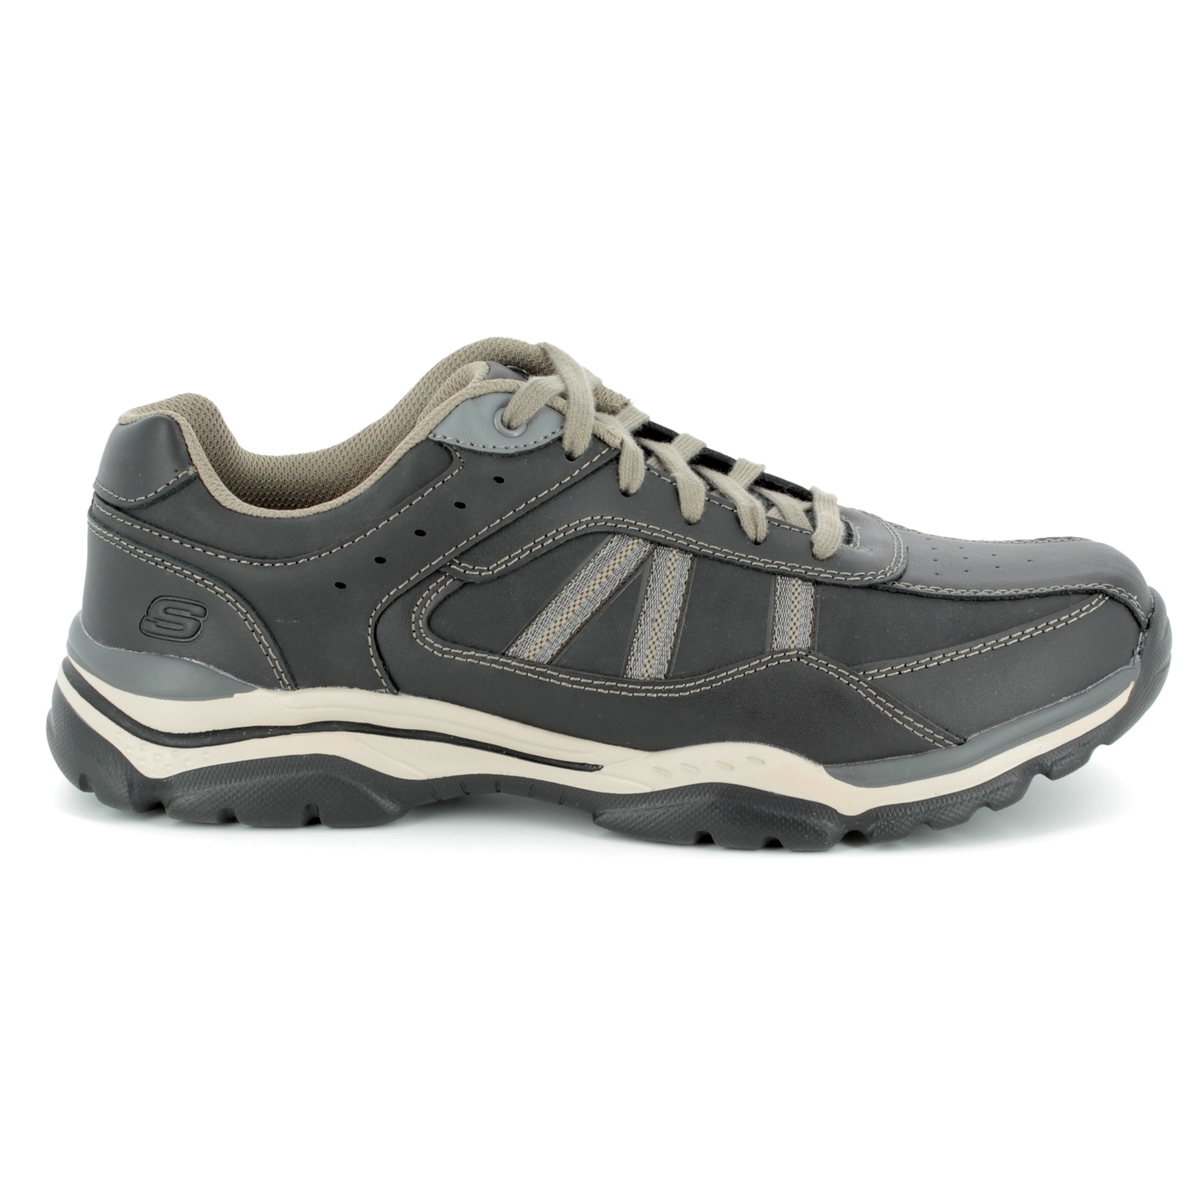 Skechers Rovato Texon Relaxed Fit 65418 